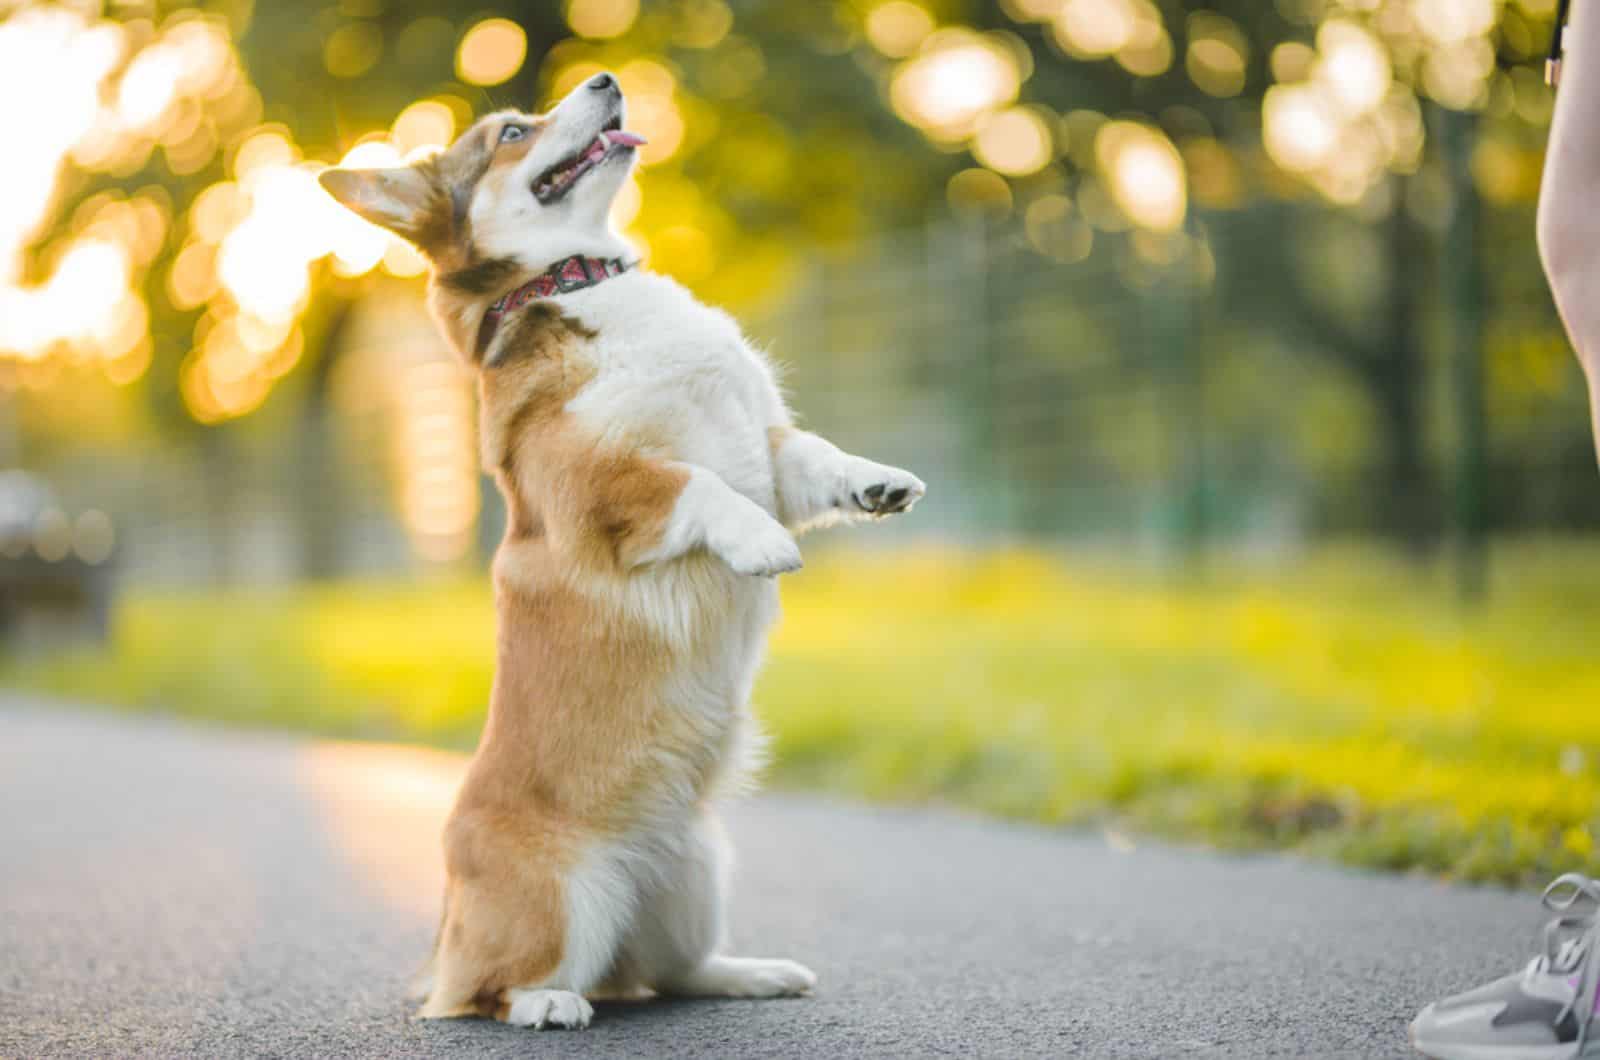 corgi standing on his two hind legs doing a trick